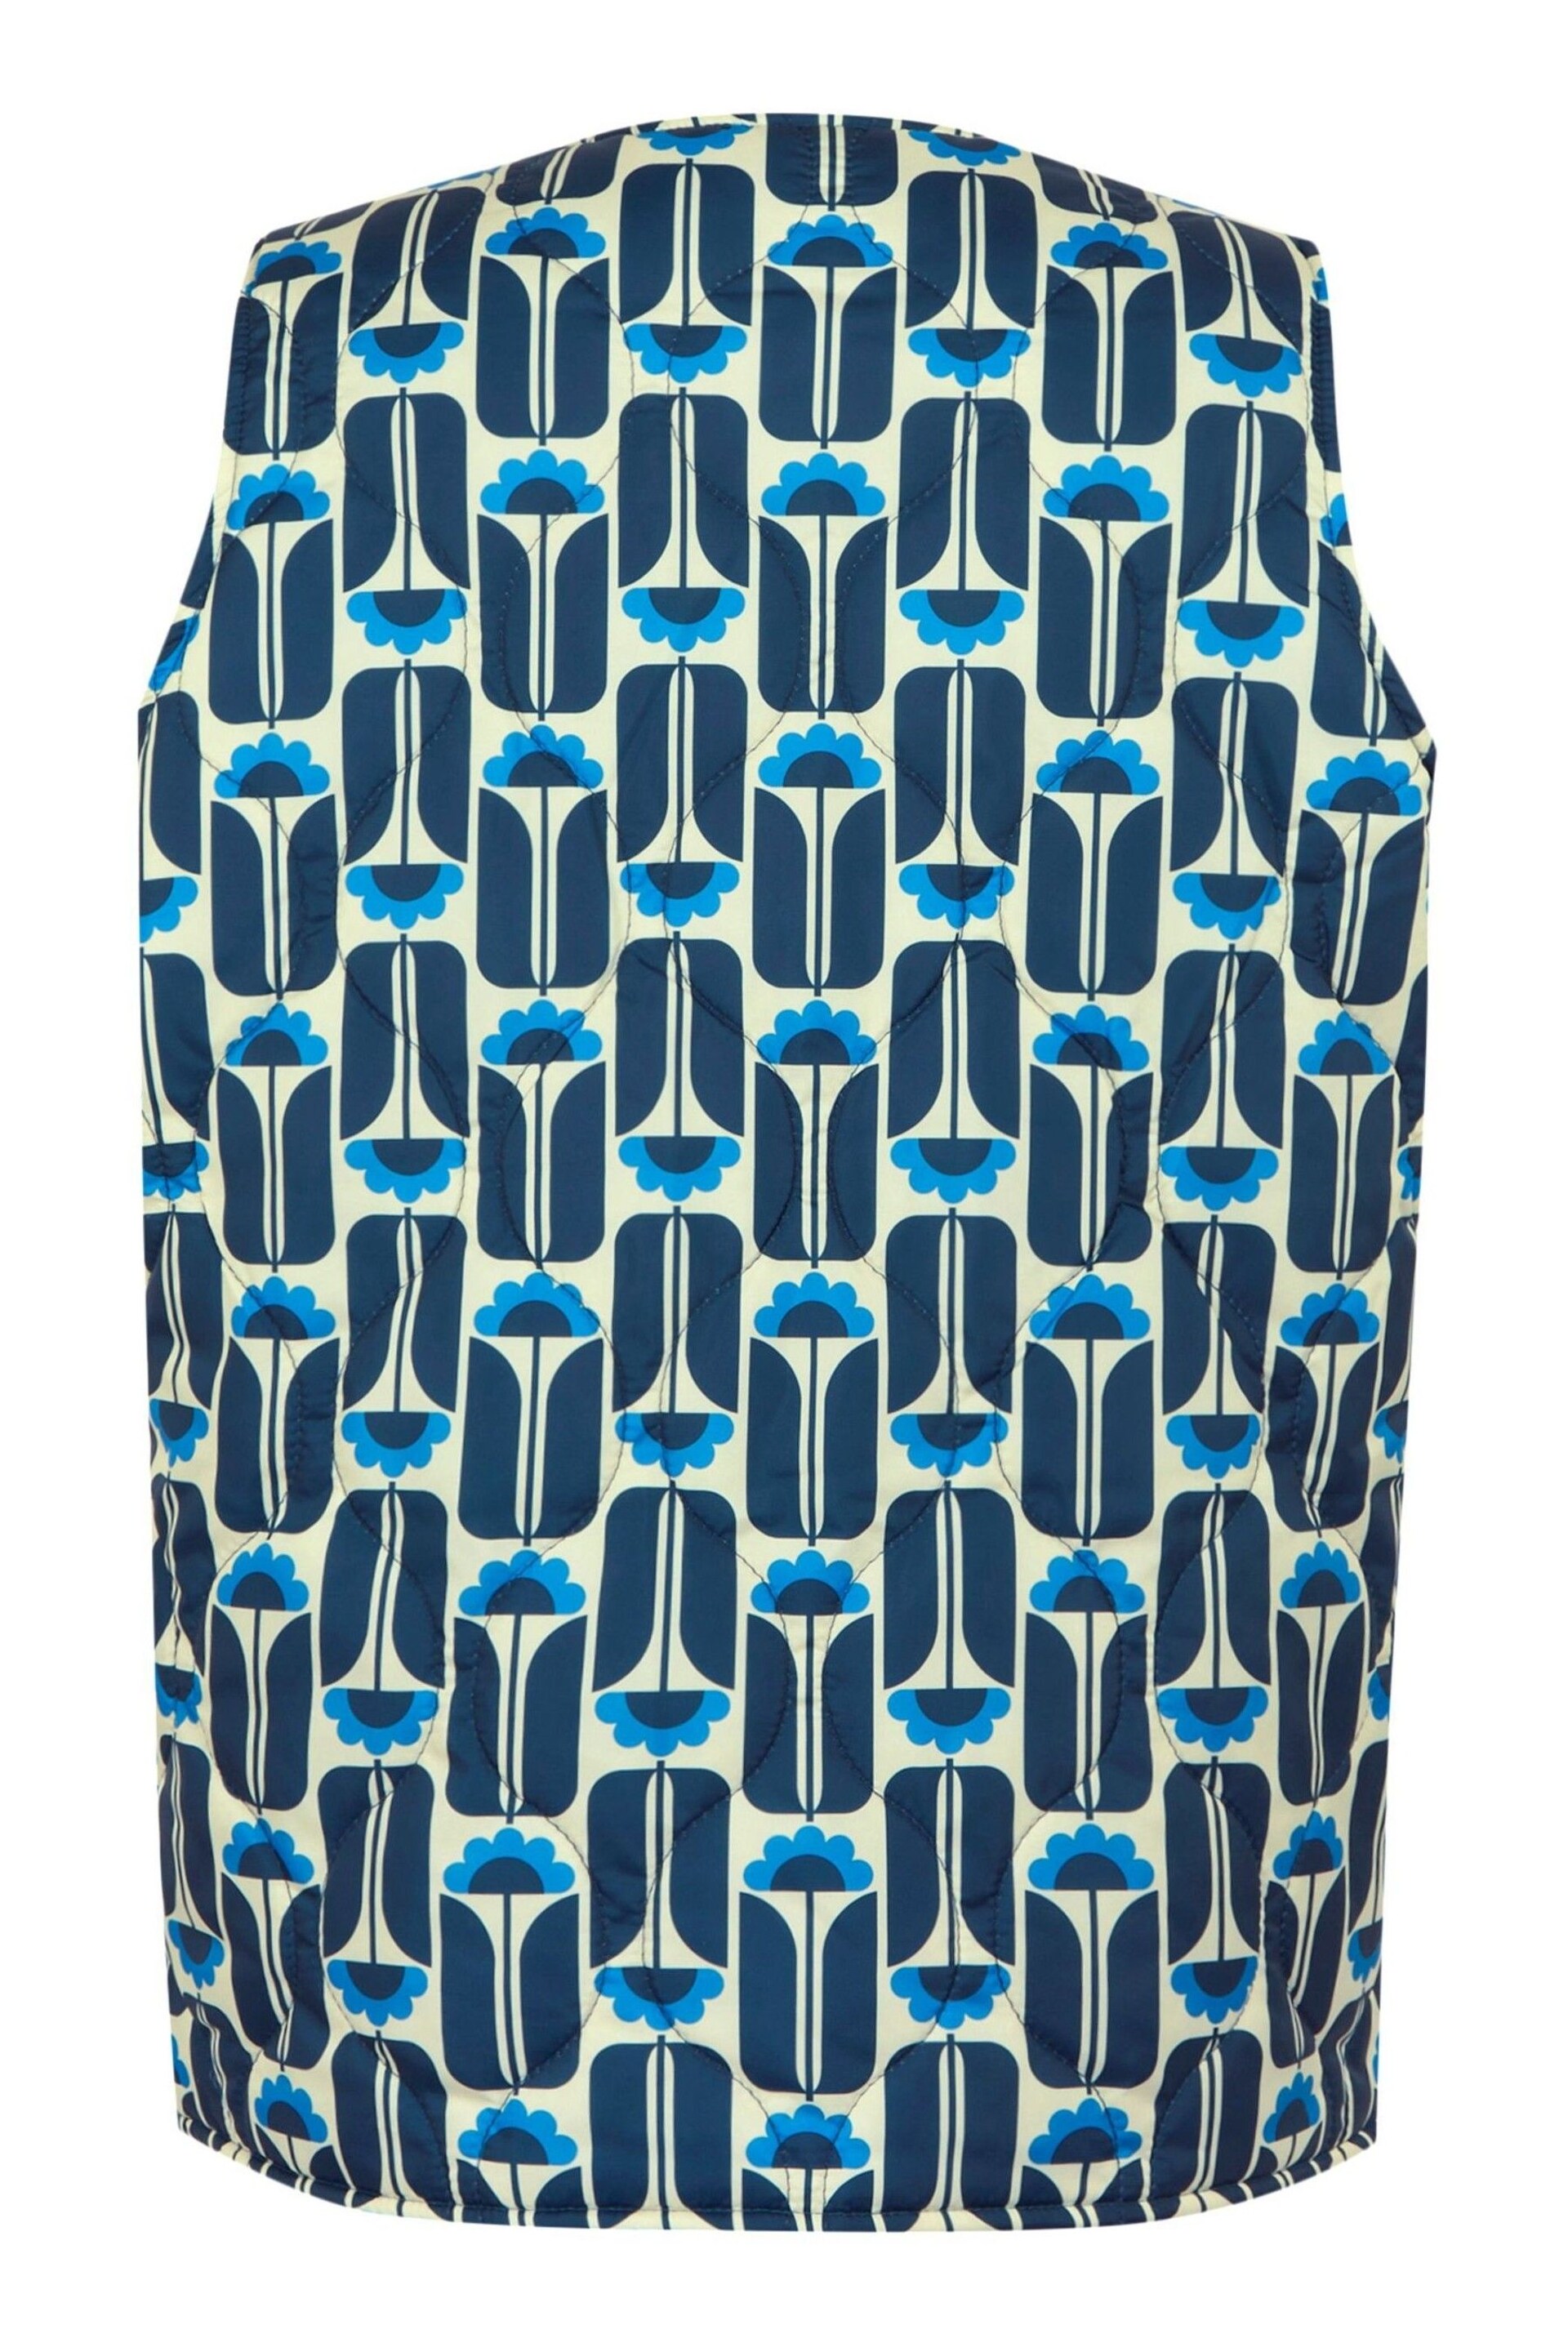 Regatta Blue Orla Kiely Printed Quilted Gilet - Image 5 of 6